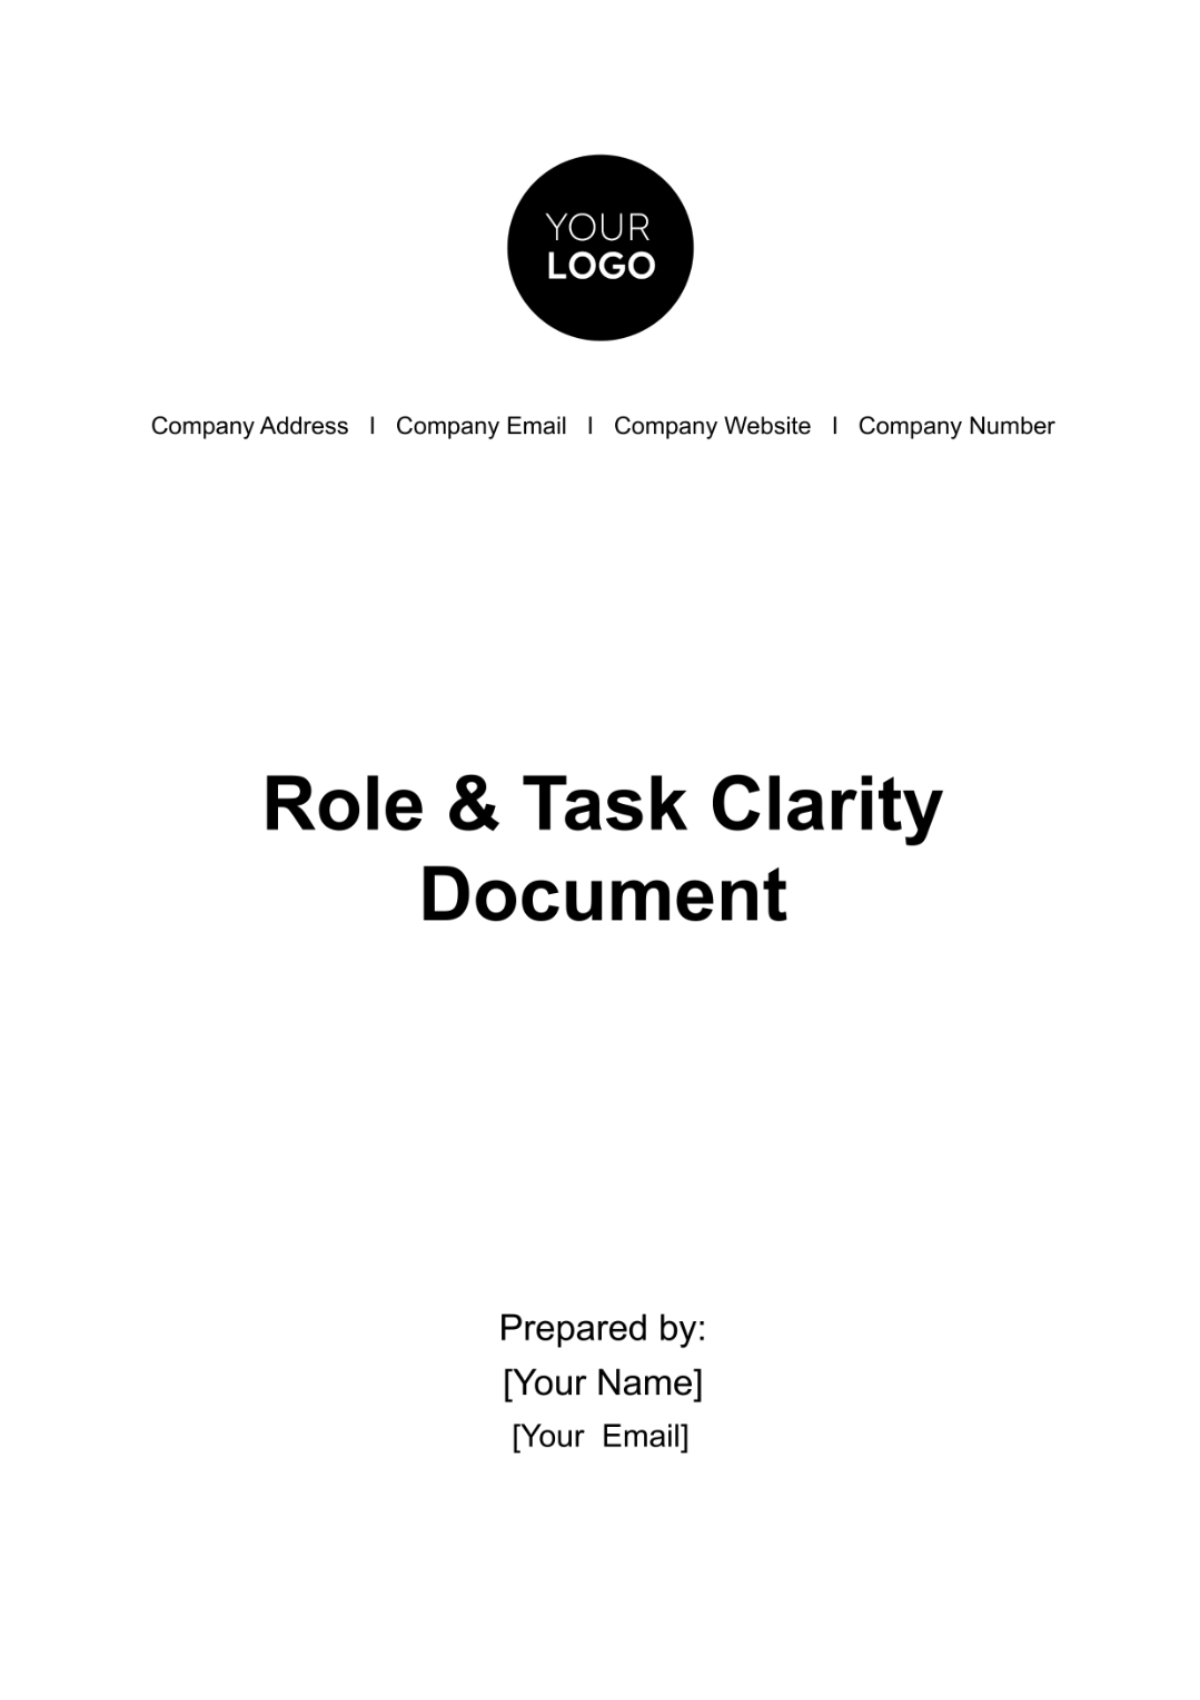 Free Role & Task Clarity Document HR Template